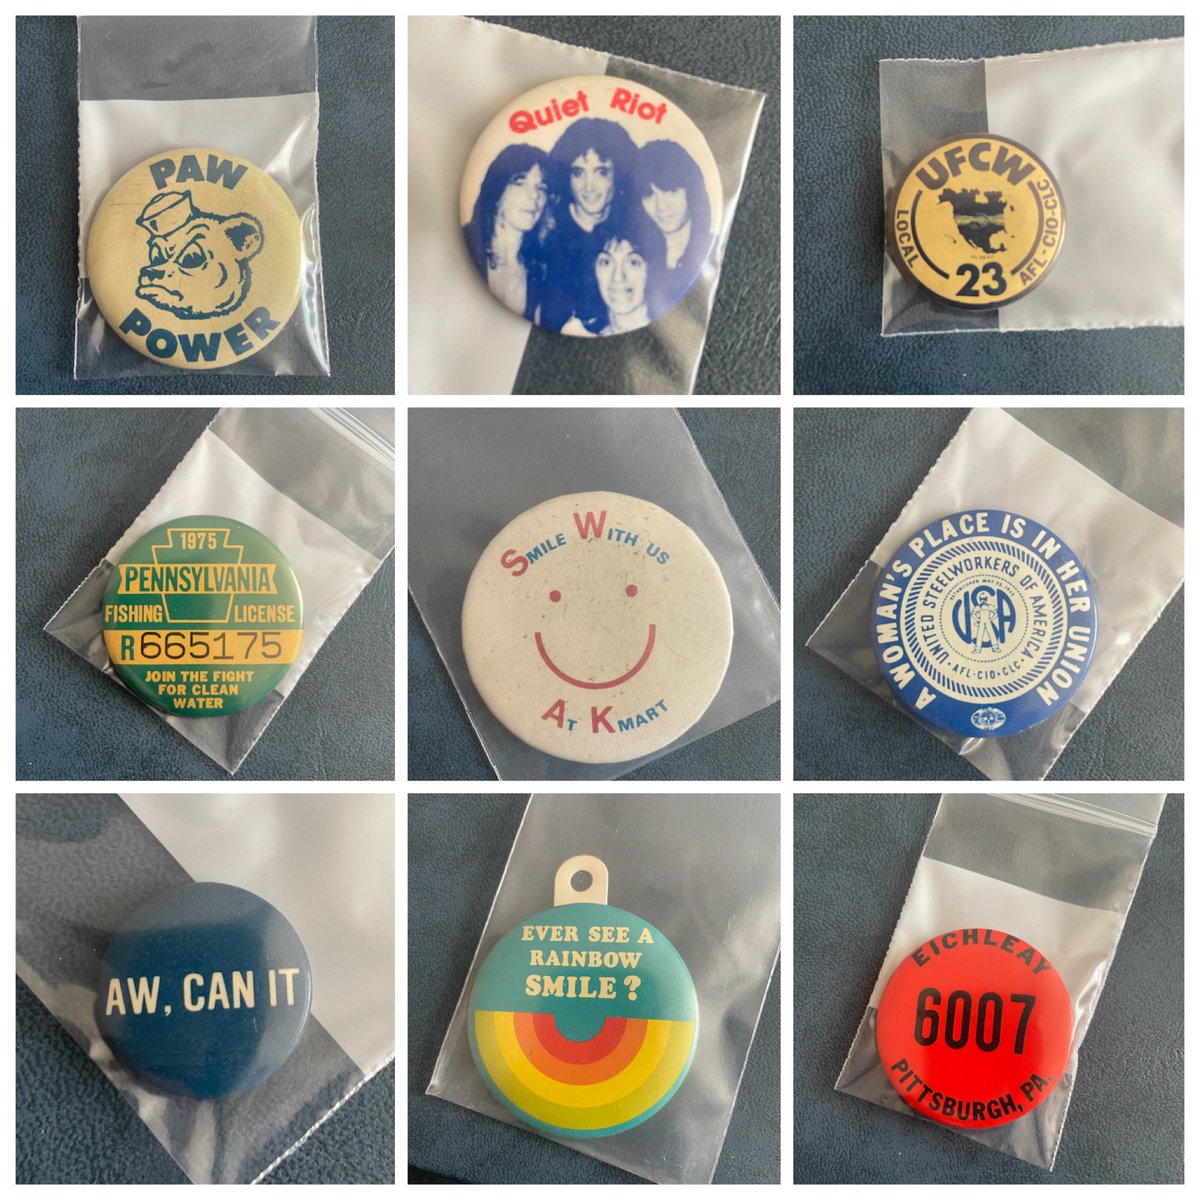 If you enjoyed the bin of loose #vintage buttons we had at the @PGHVintageMixer, you’re gonna love these… Look for these next month at #VintageMart! #vintagepins #vintagepin #vintagepinback #pinbackbuttons #buttons #vintagebuttons #vintagepinback #popculture #pittsburgh